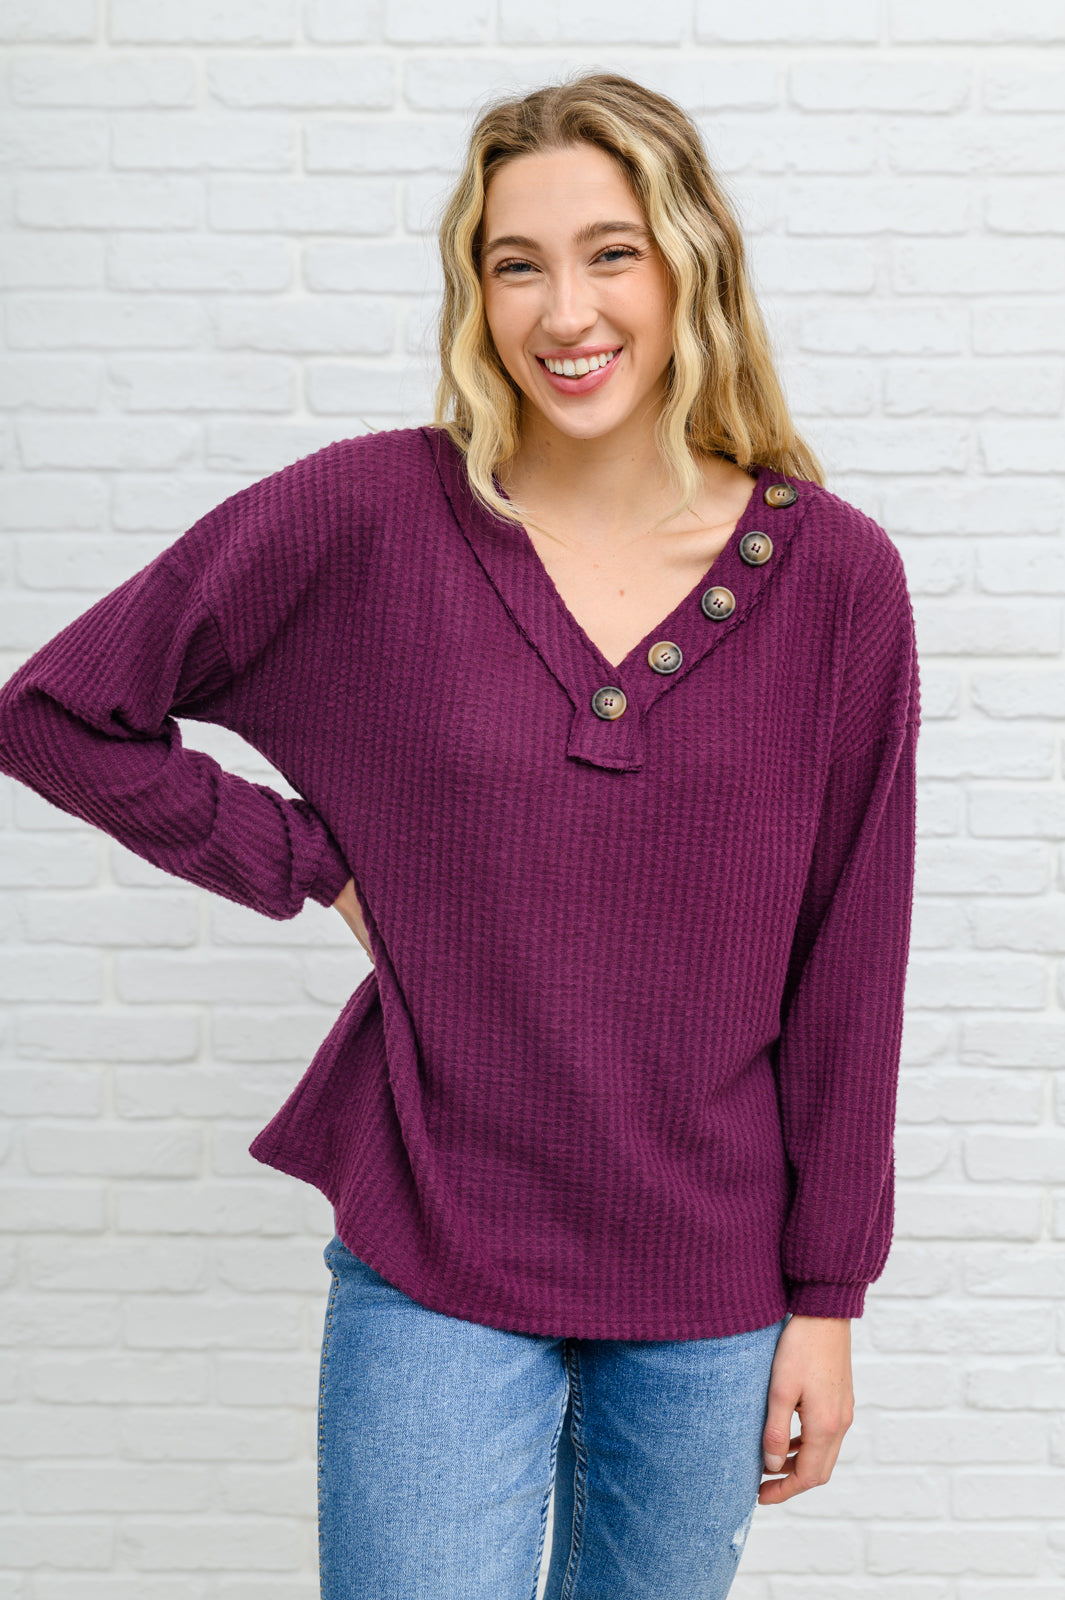 Long Sleeve Waffle Knit Top In Eggplant